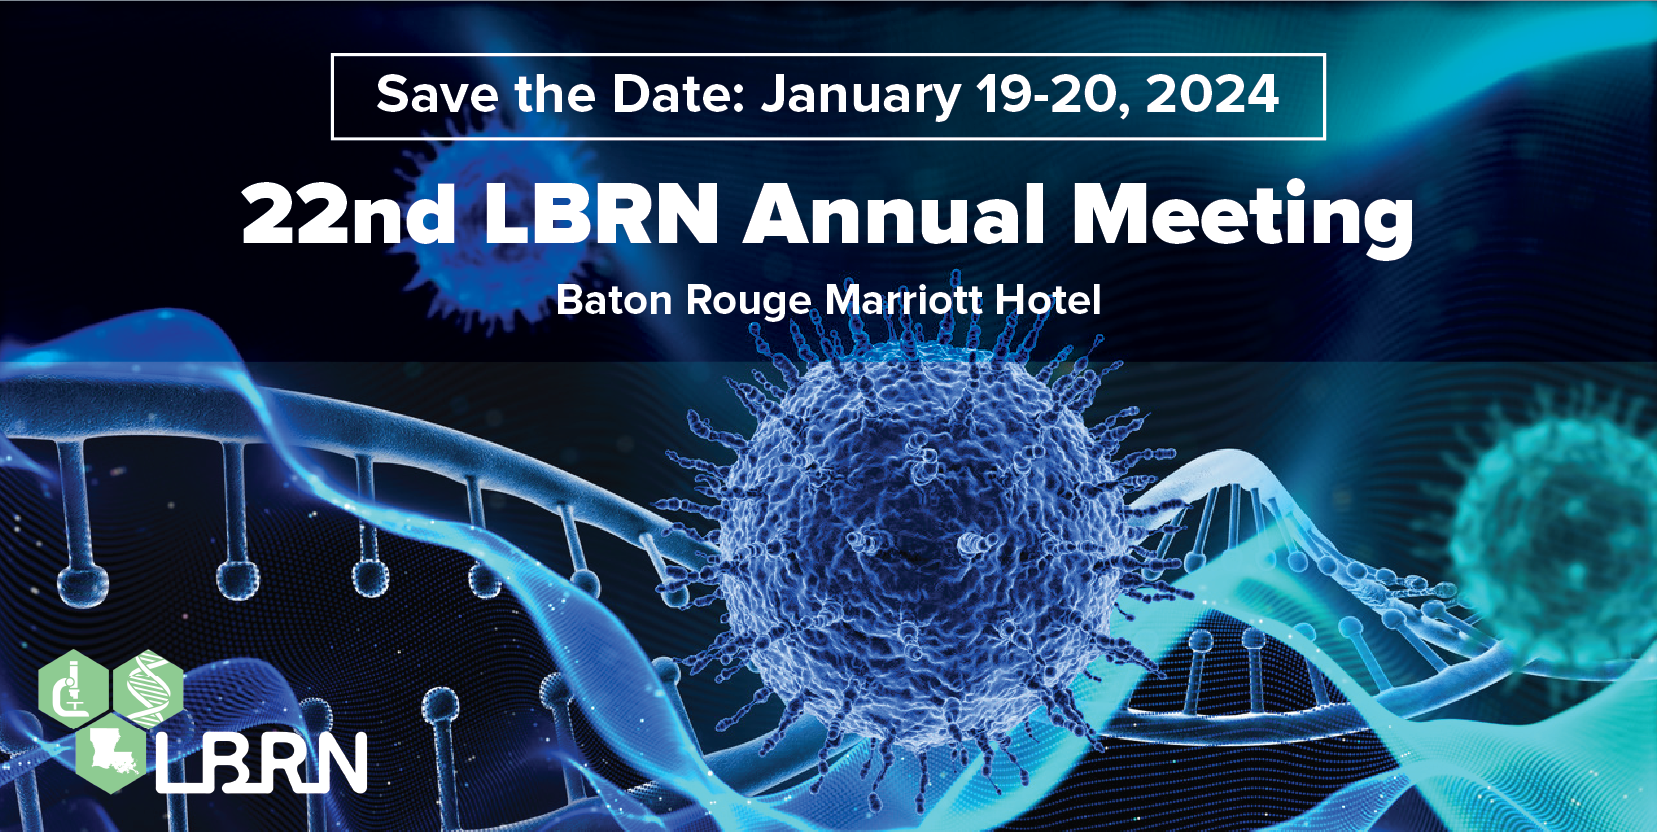 Save the Date for LBRN - 22nd Annual Meeting